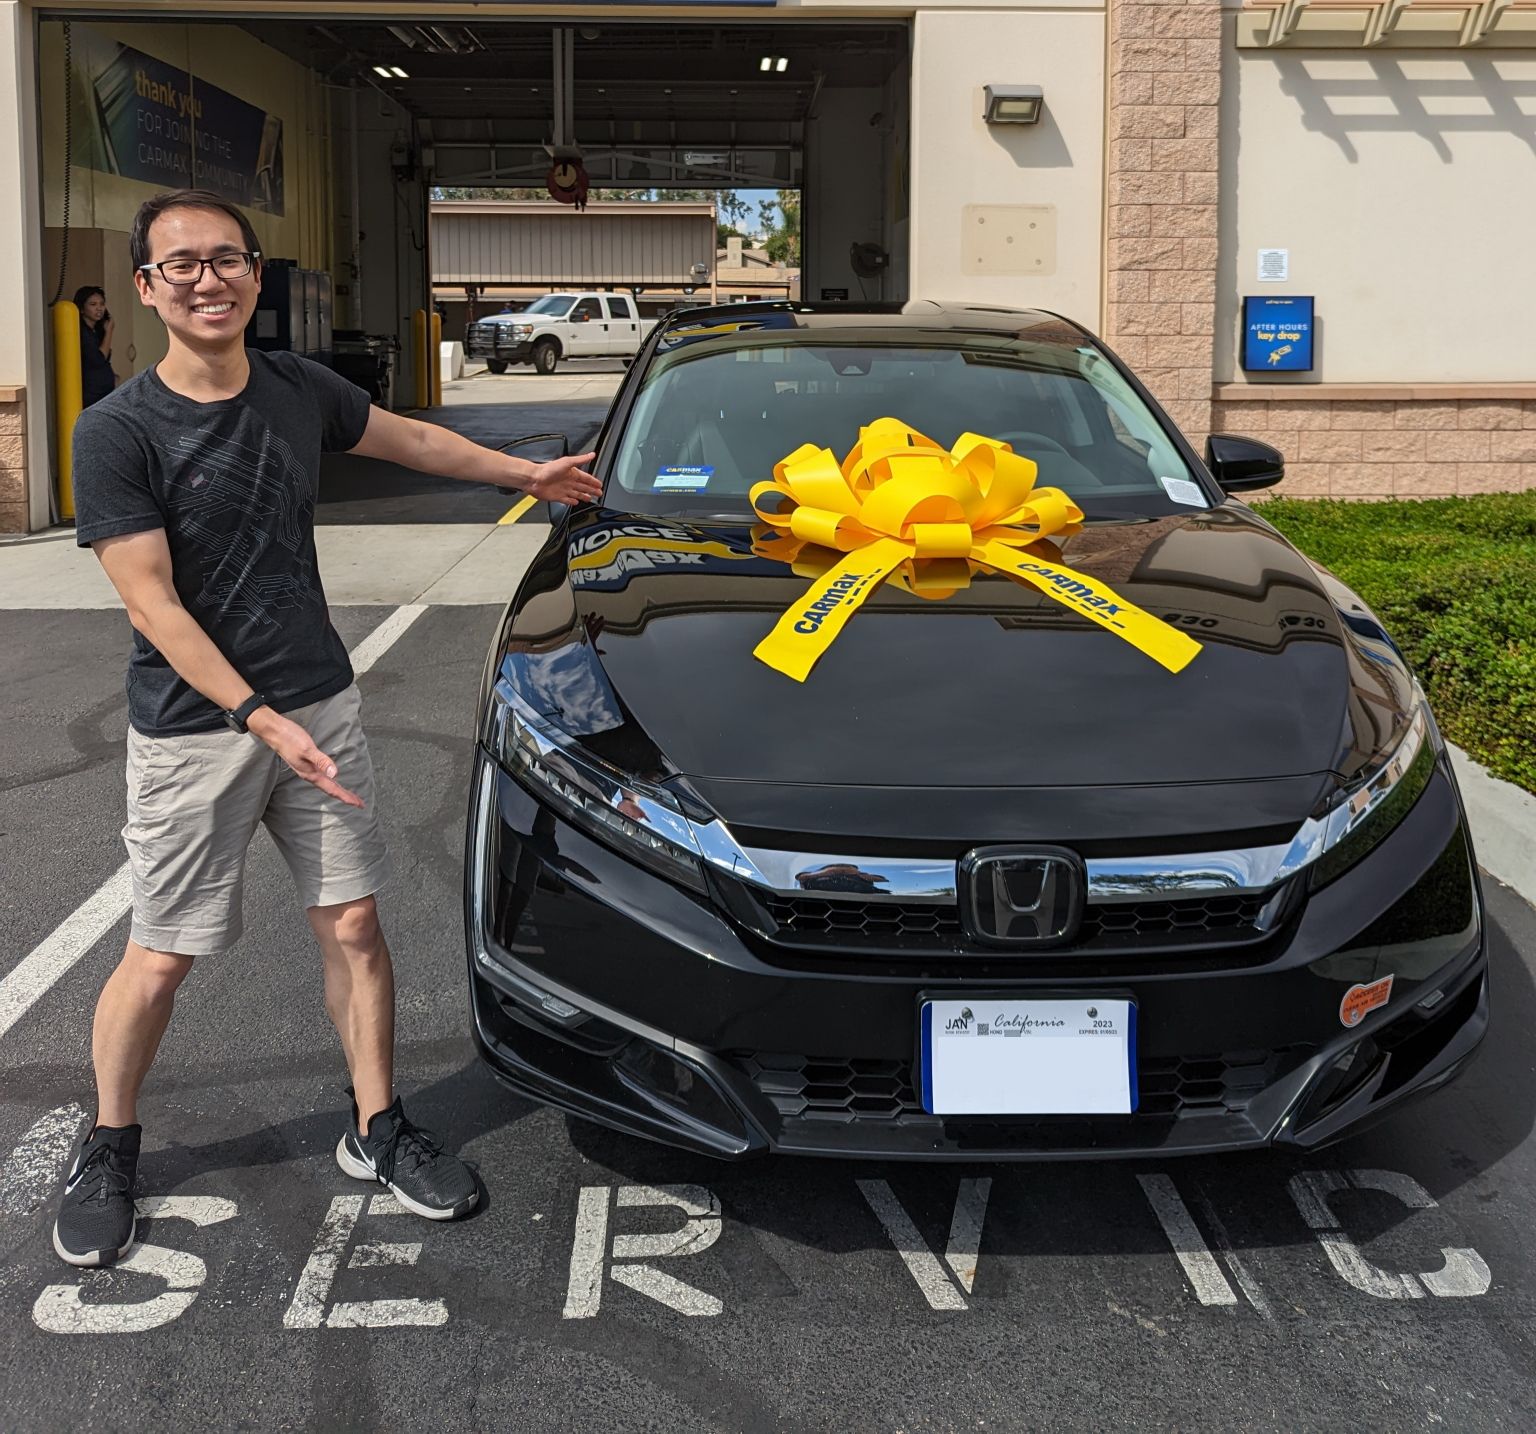 Adam standing next to a Clarity at CarMax with a big yellow bow on the hood